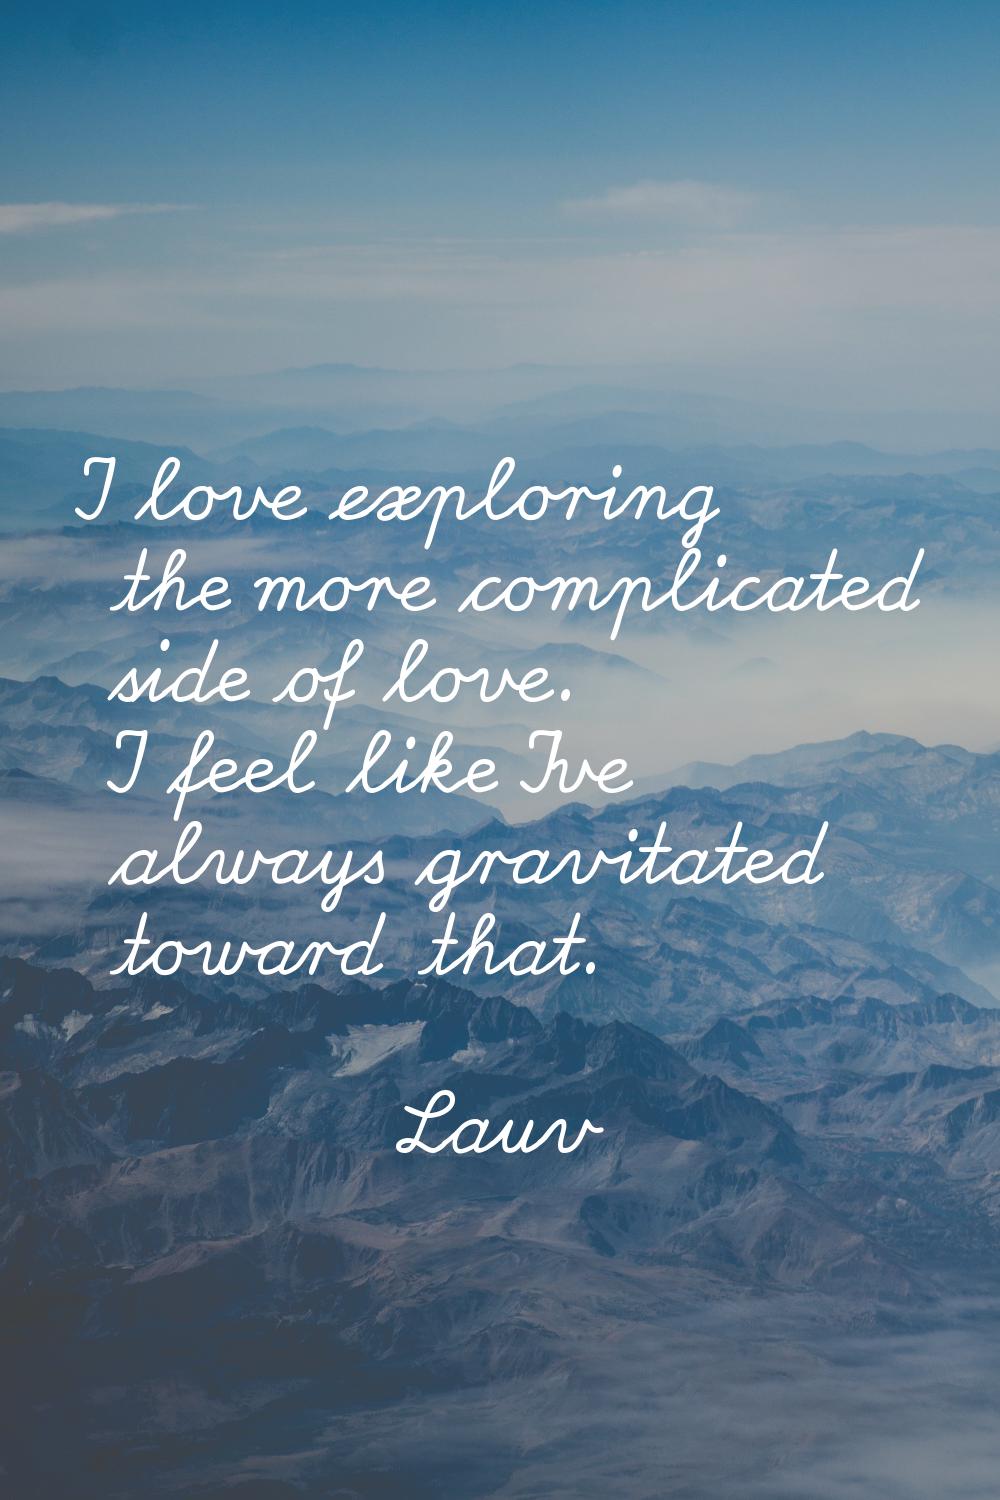 I love exploring the more complicated side of love. I feel like I've always gravitated toward that.